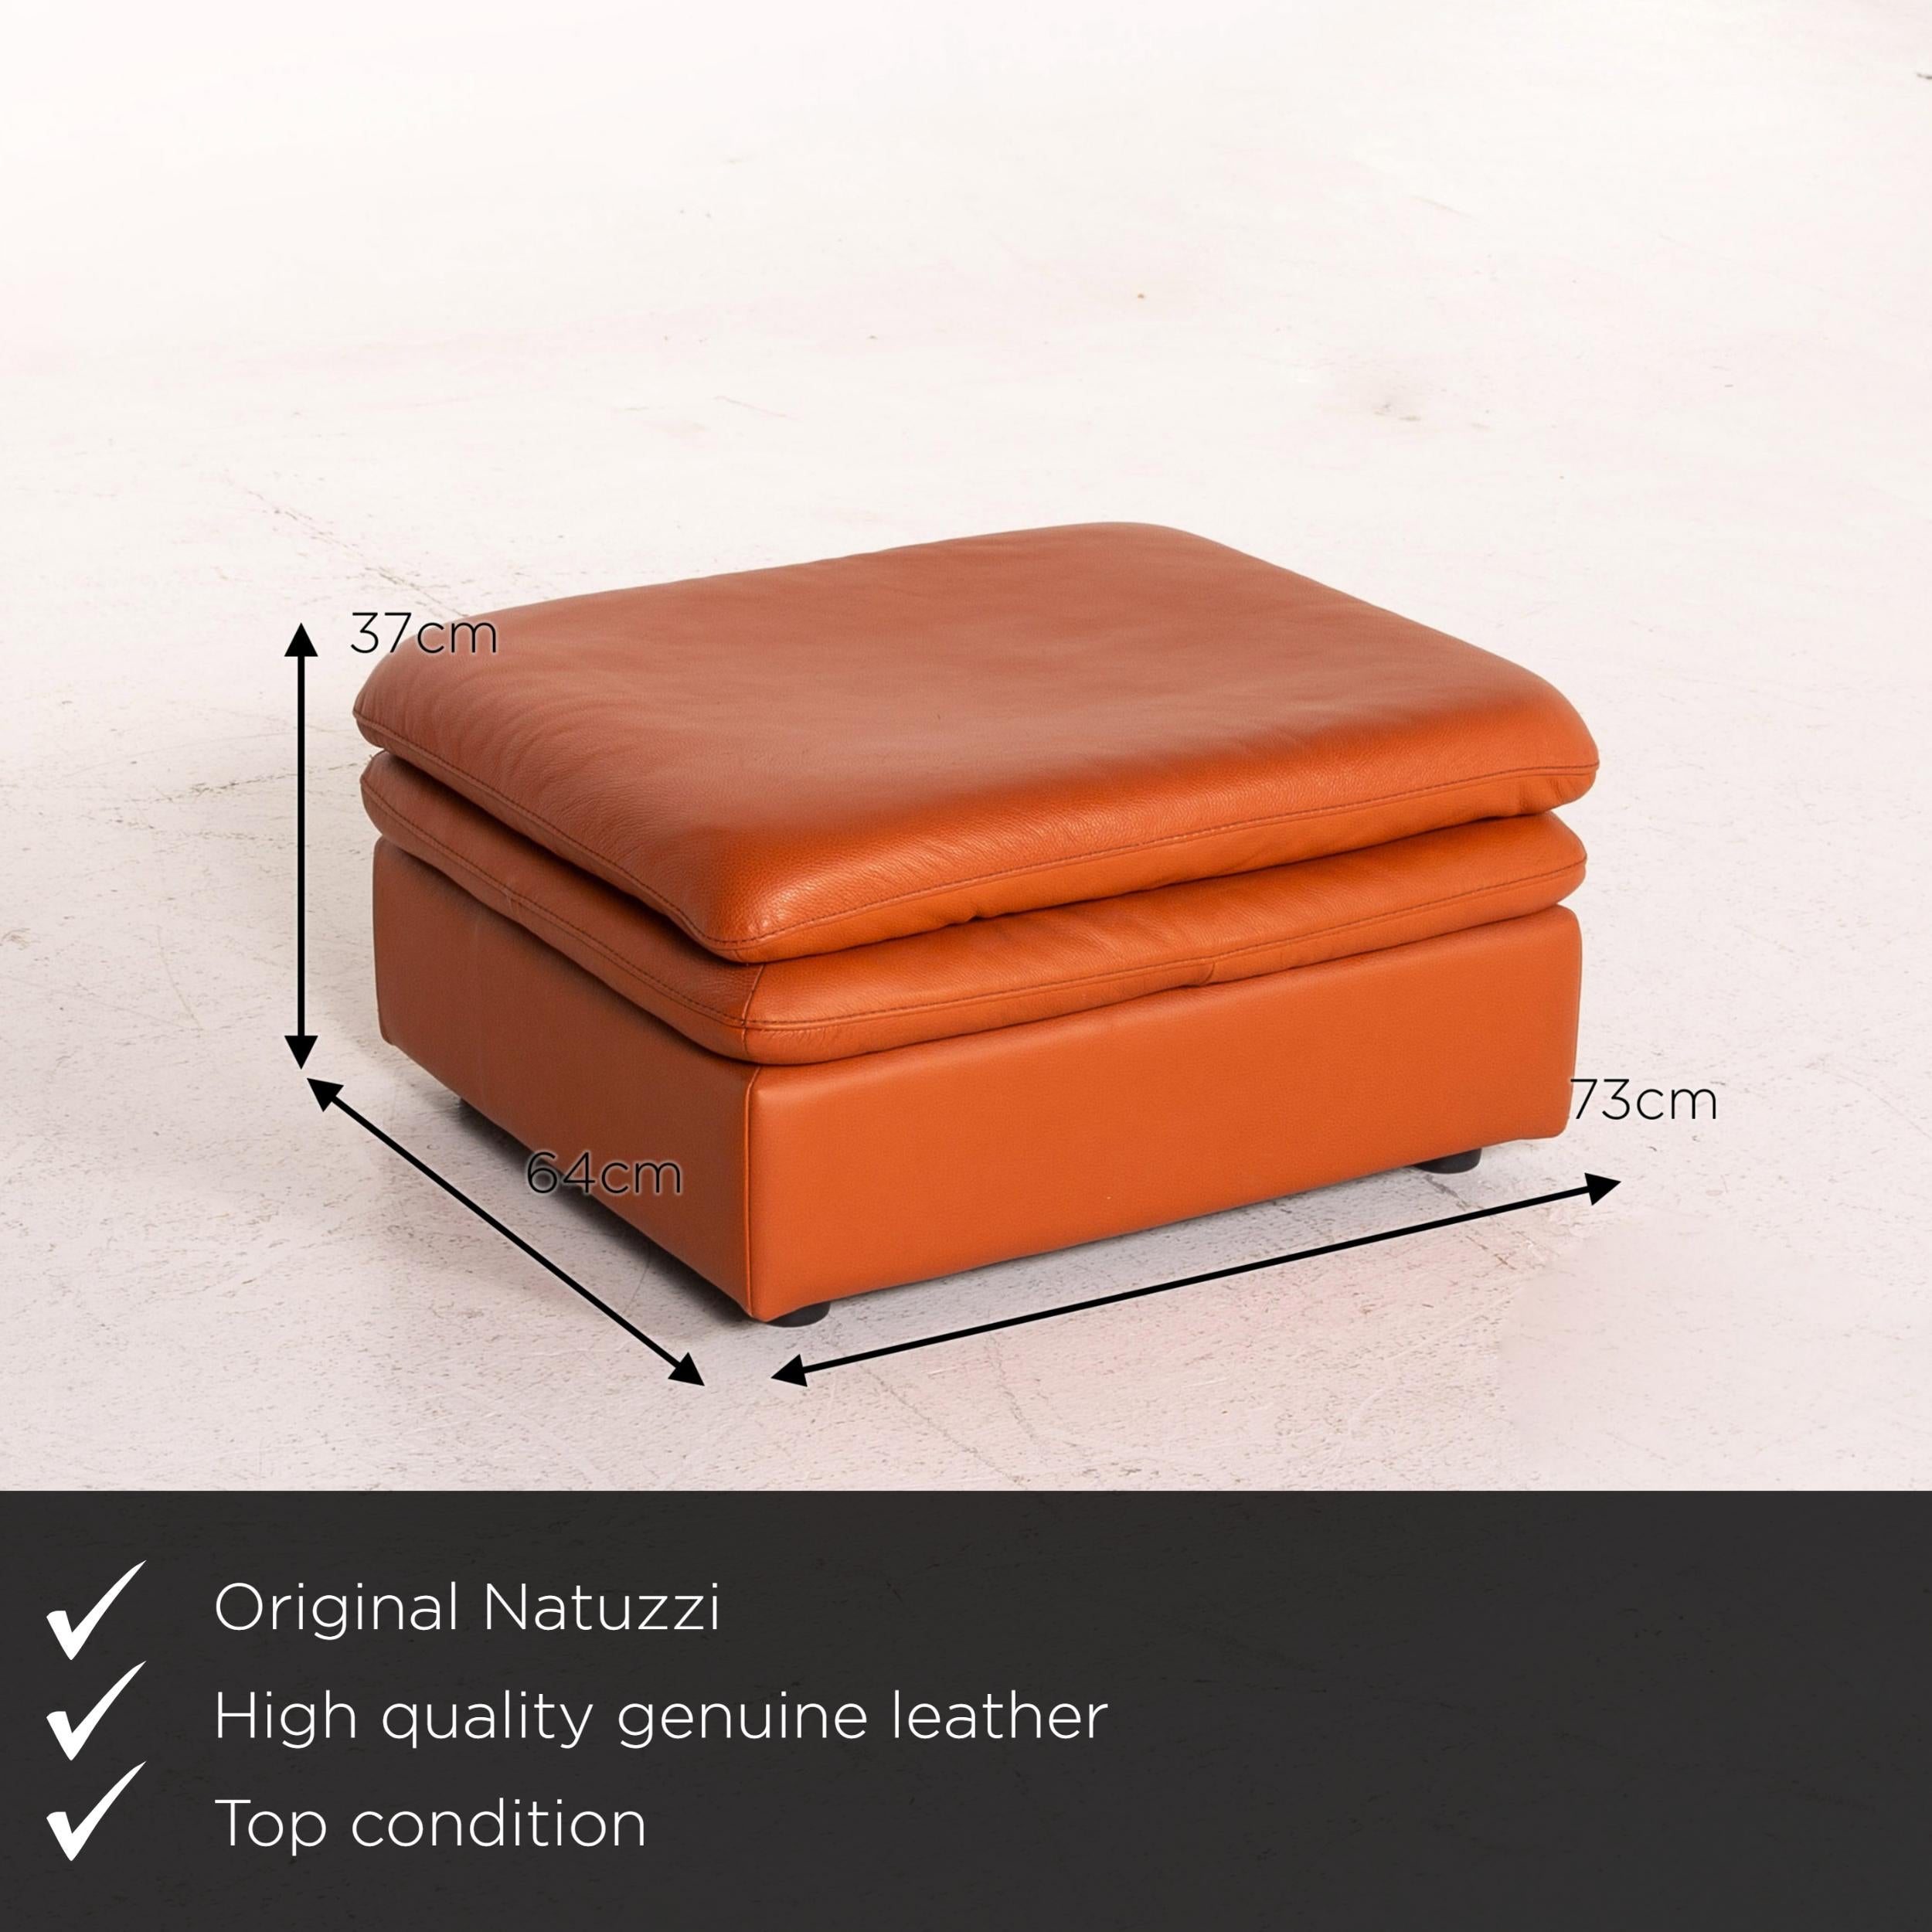 We present to you a Natuzzi leather stool terracotta orange ottoman.

 

 Product measurements in centimeters:
 

 Depth 64
 Width 73
 Height 37.




  